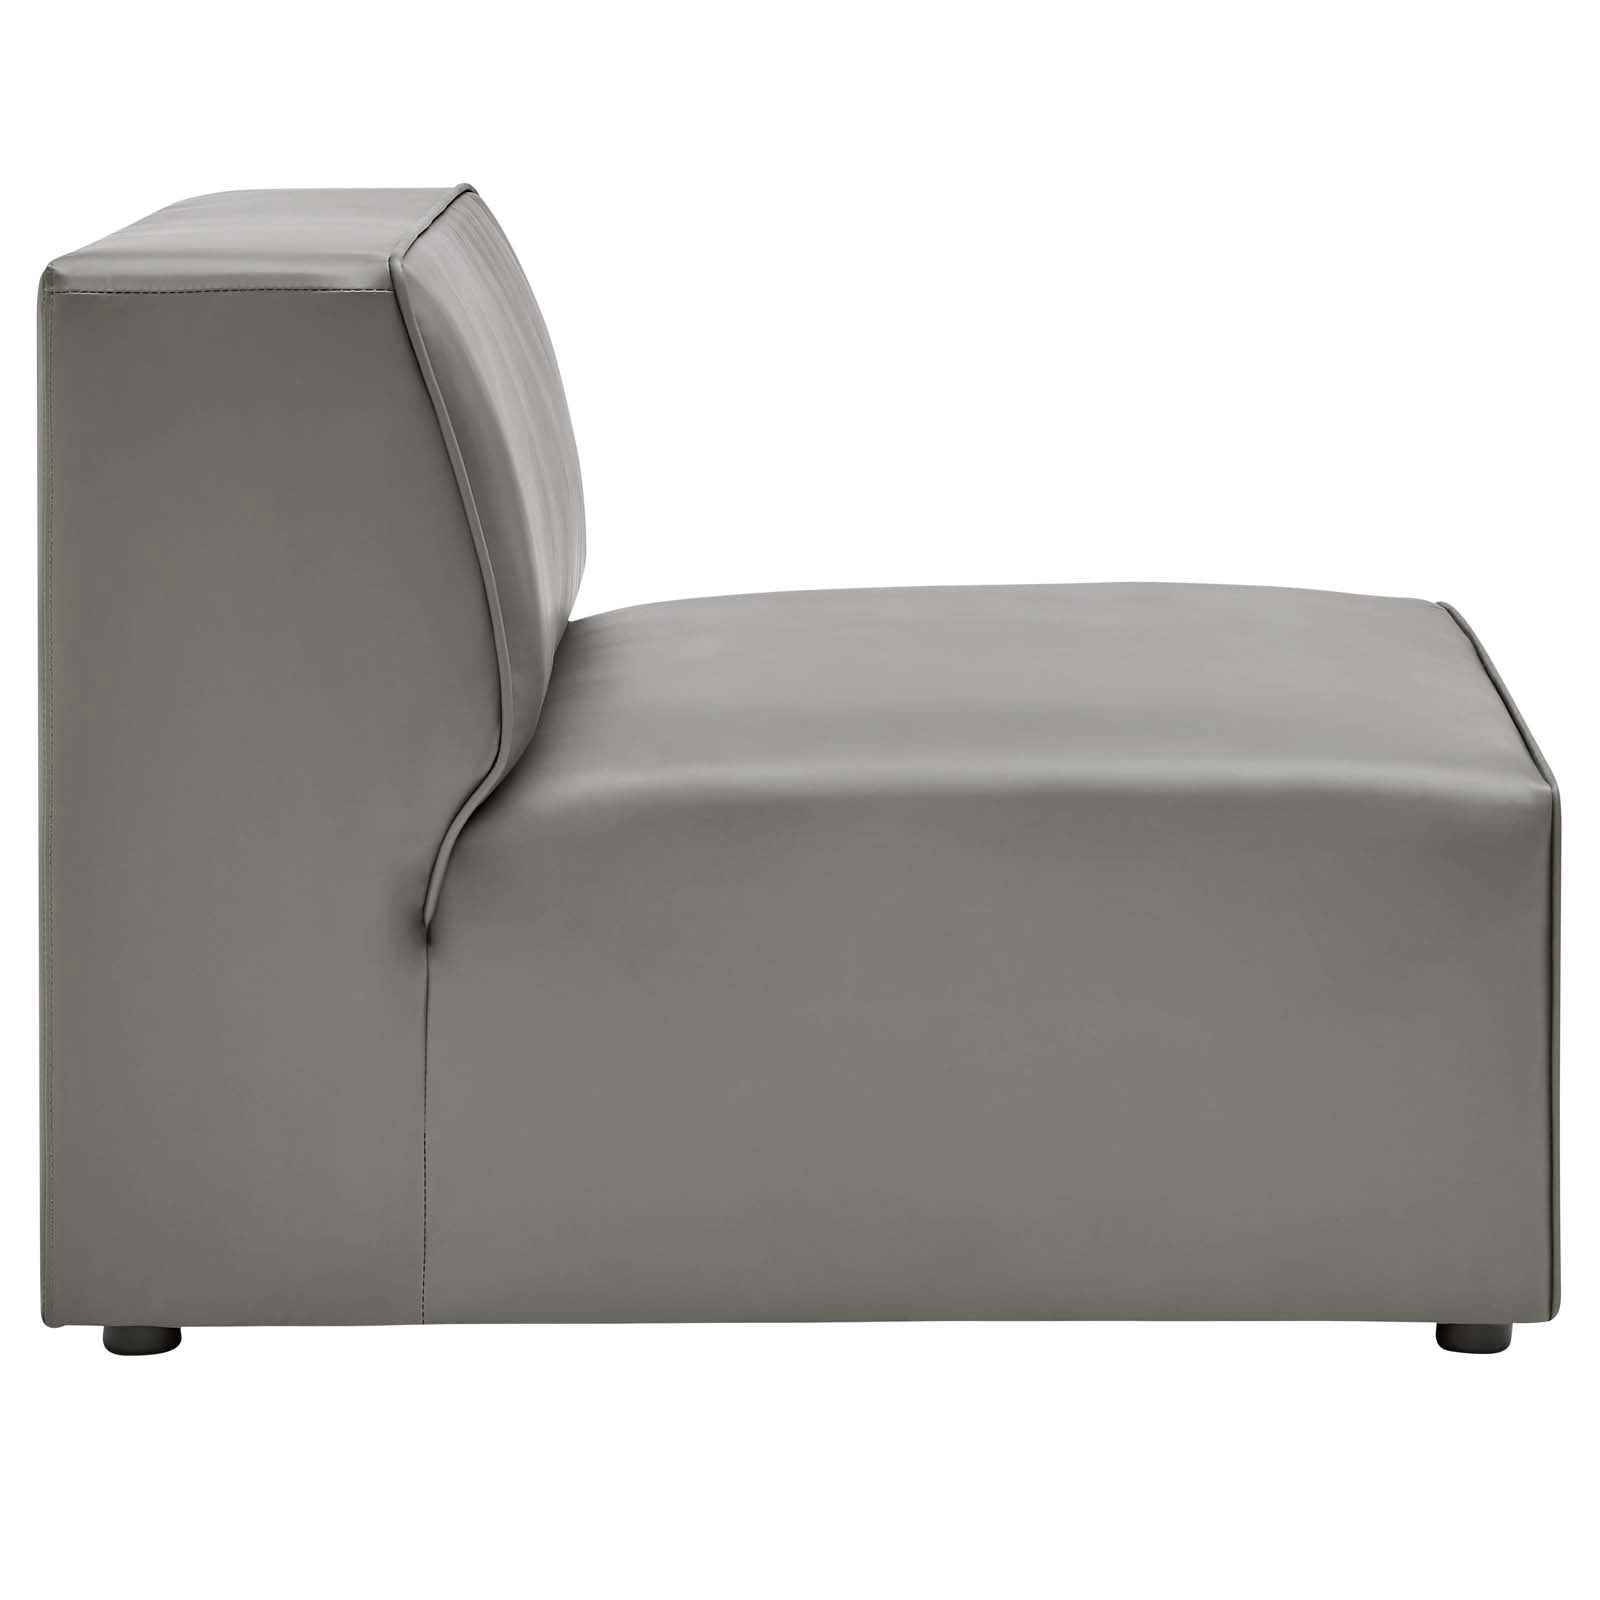 Modway Accent Chairs - Mingle Vegan Leather Armless Chair Gray